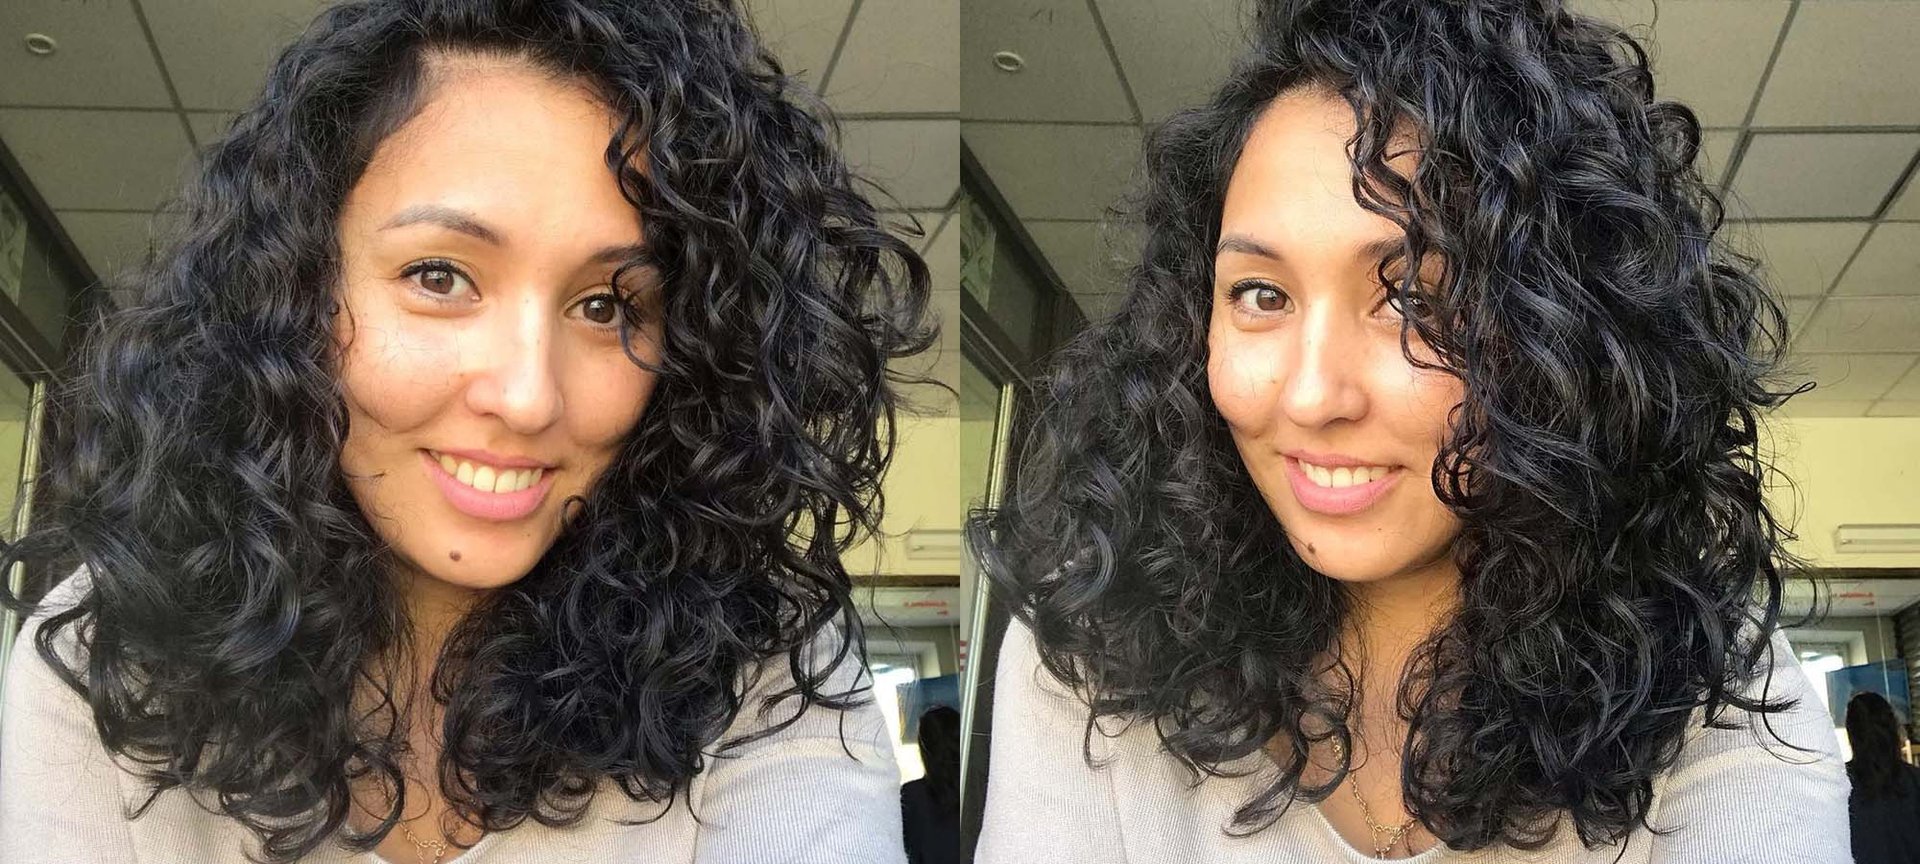 Newest Beach wave perm cost uk Everything you need to know